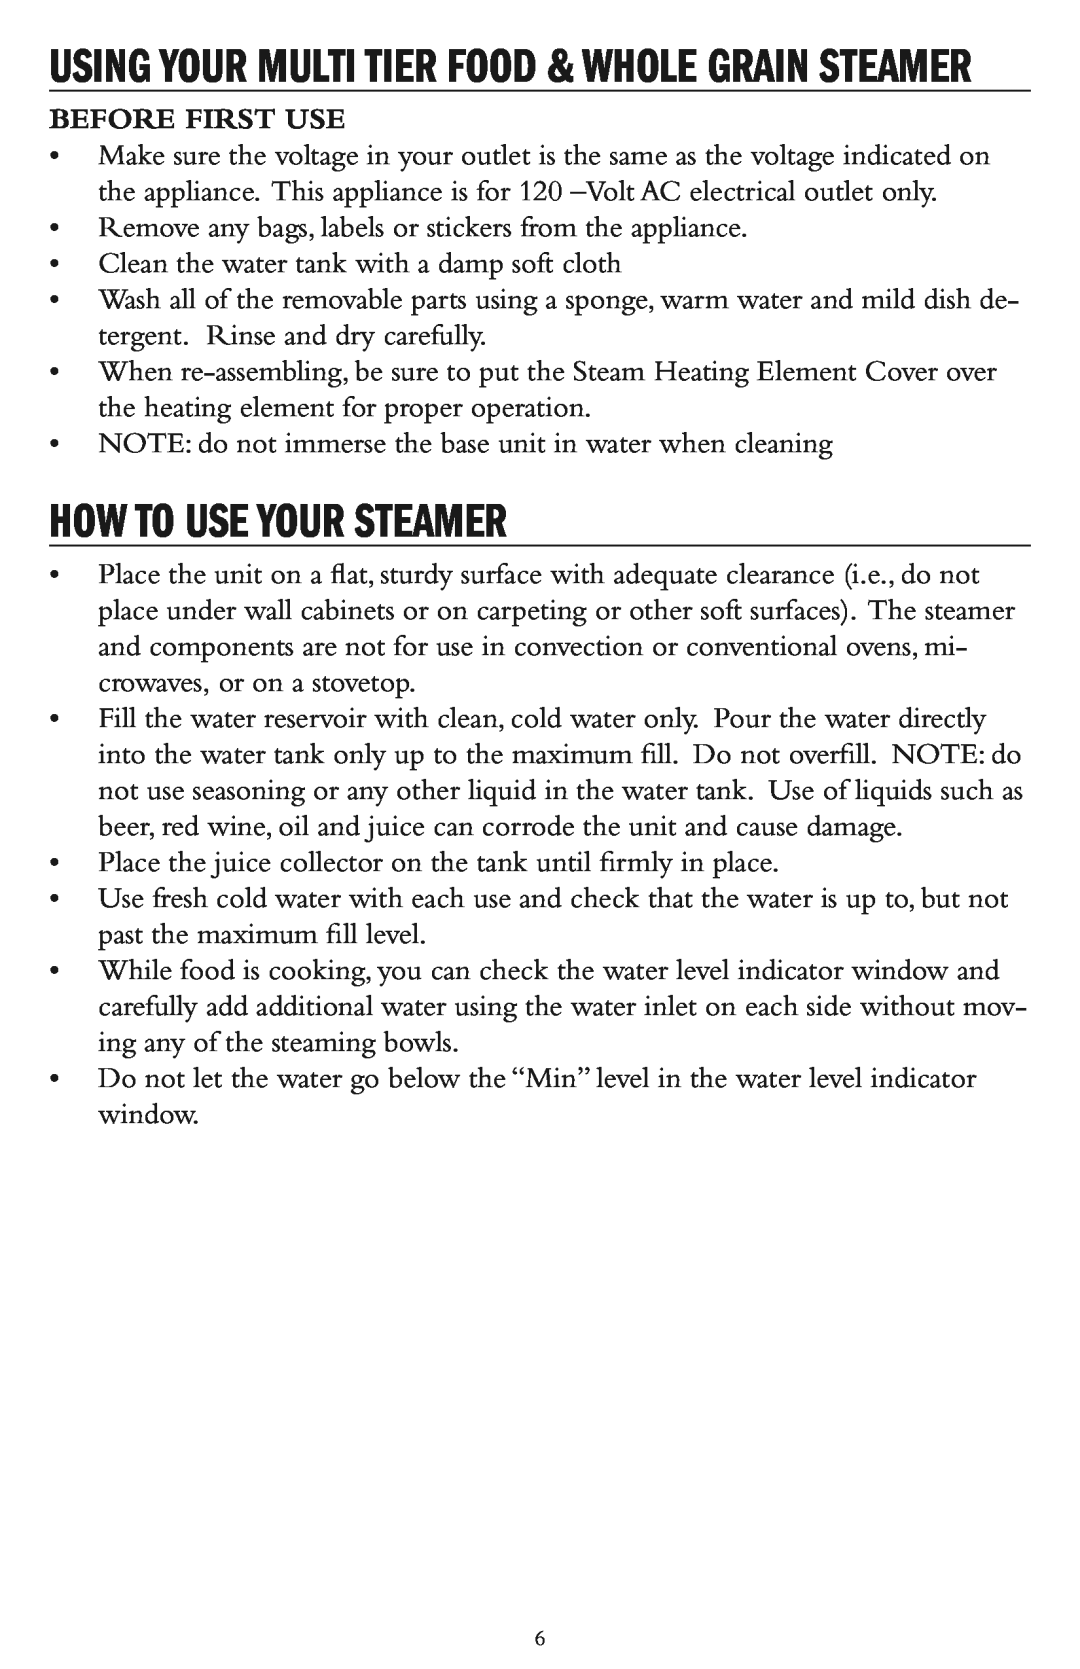 Taylor AS-1500-BL manual How To Use Your Steamer, Using Your Multi Tier Food & Whole Grain Steamer, Before First Use 